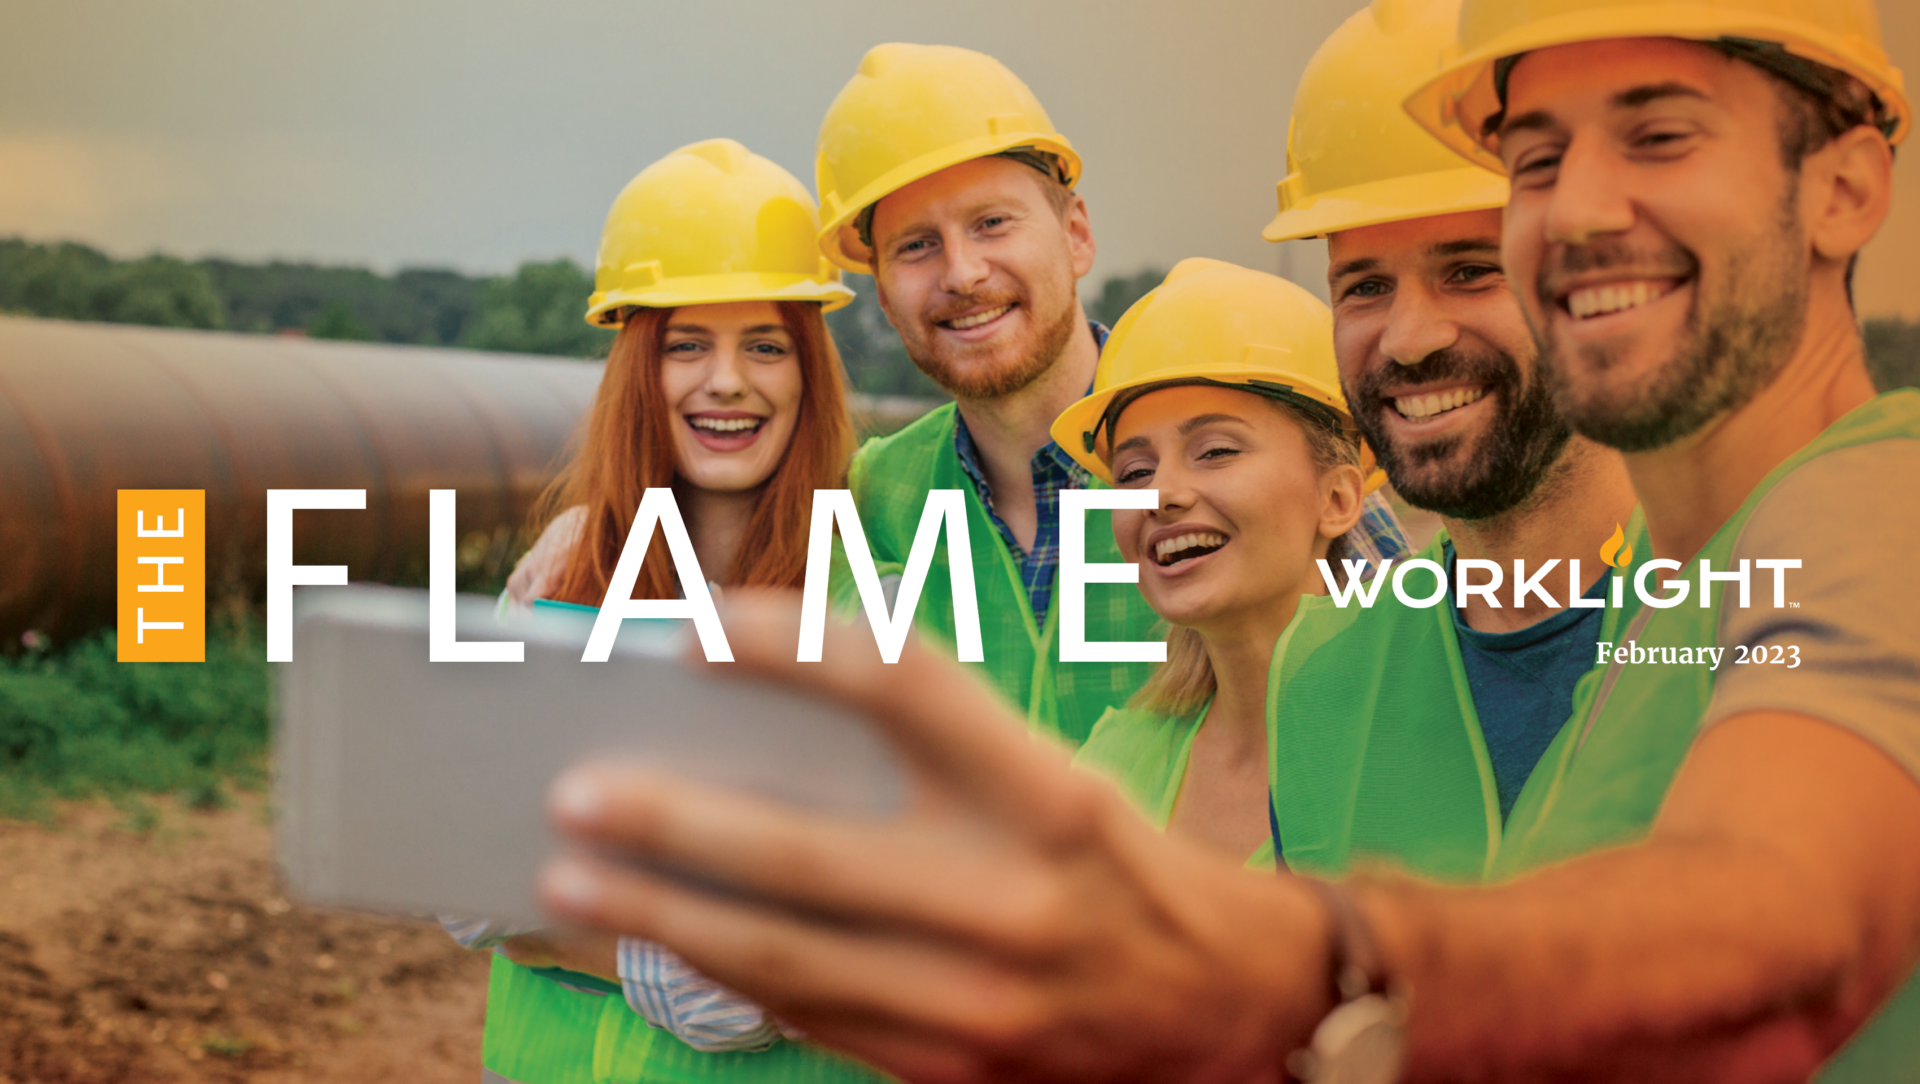 four people in hard hats taking a selfie with the worklight flame logo over the image